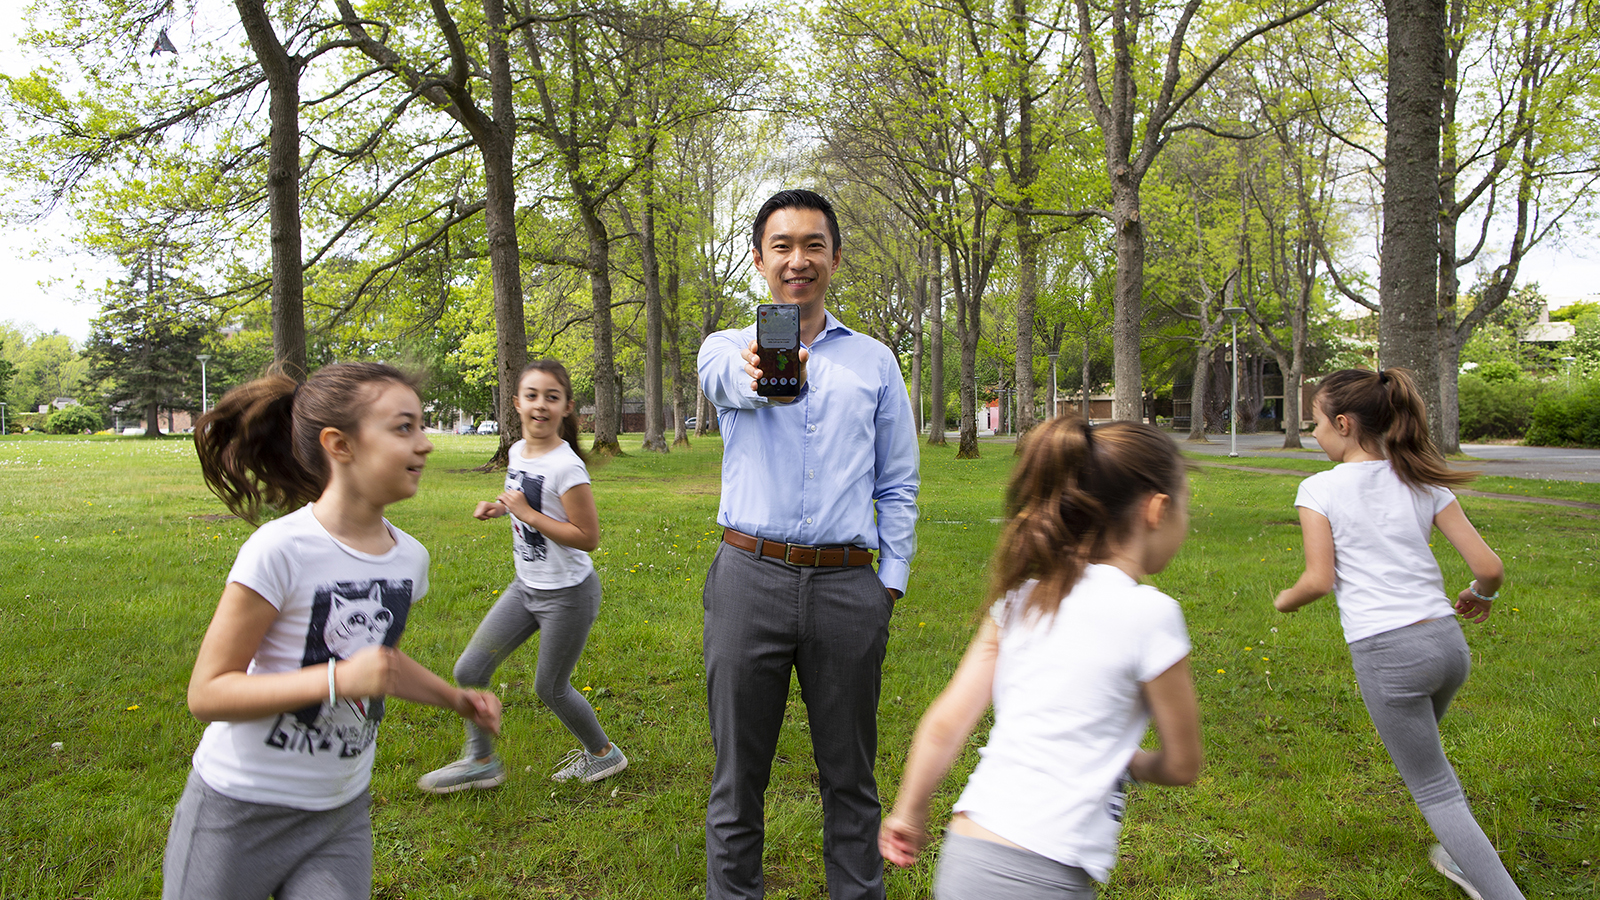 UVic researcher Sam Liu stands holding phone on the quad with kids running around him